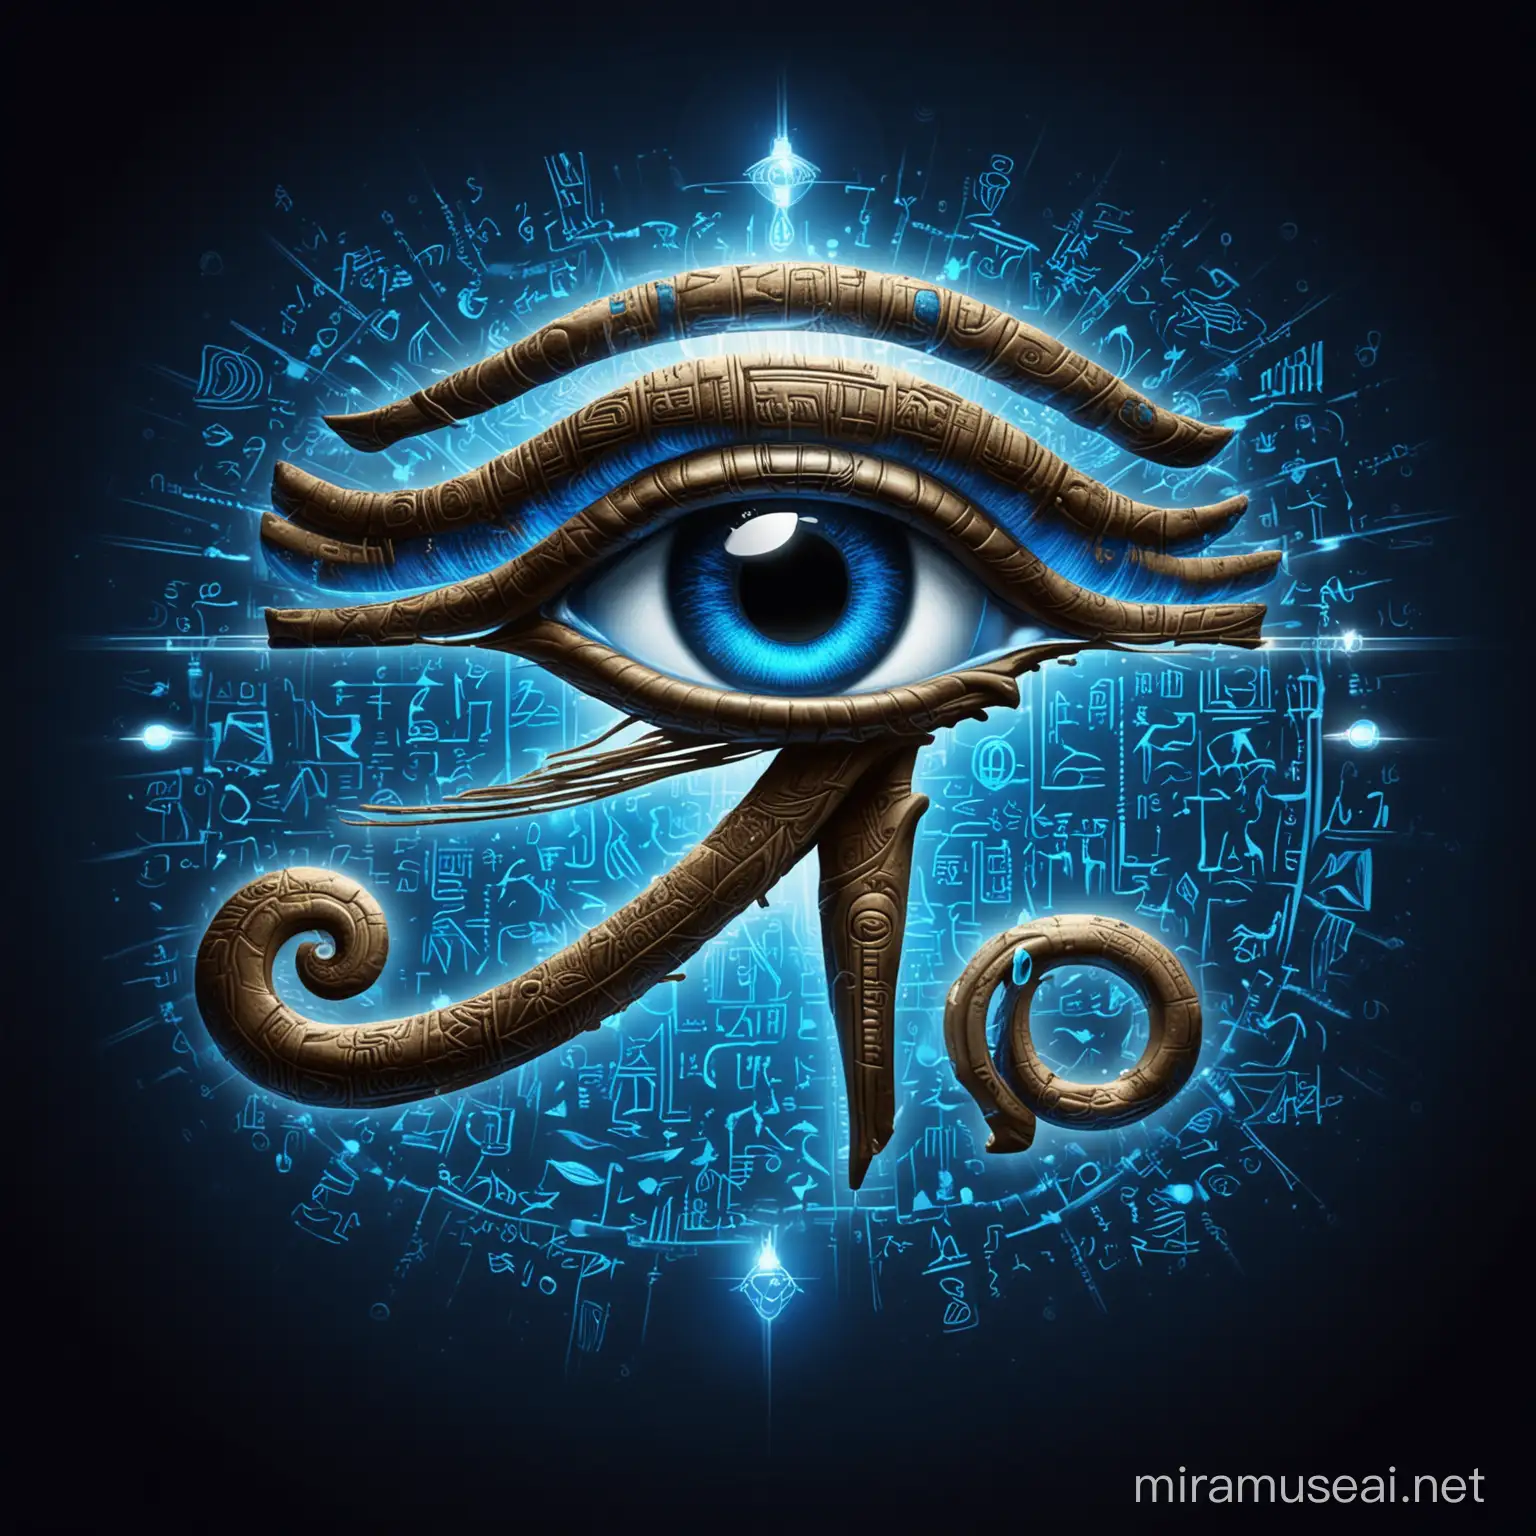 Transparent Background, profile view,  eye of Horus,left and right, blue, with illuminated hieroglyphics all around it, blue, also with illuminated hieroglyphs